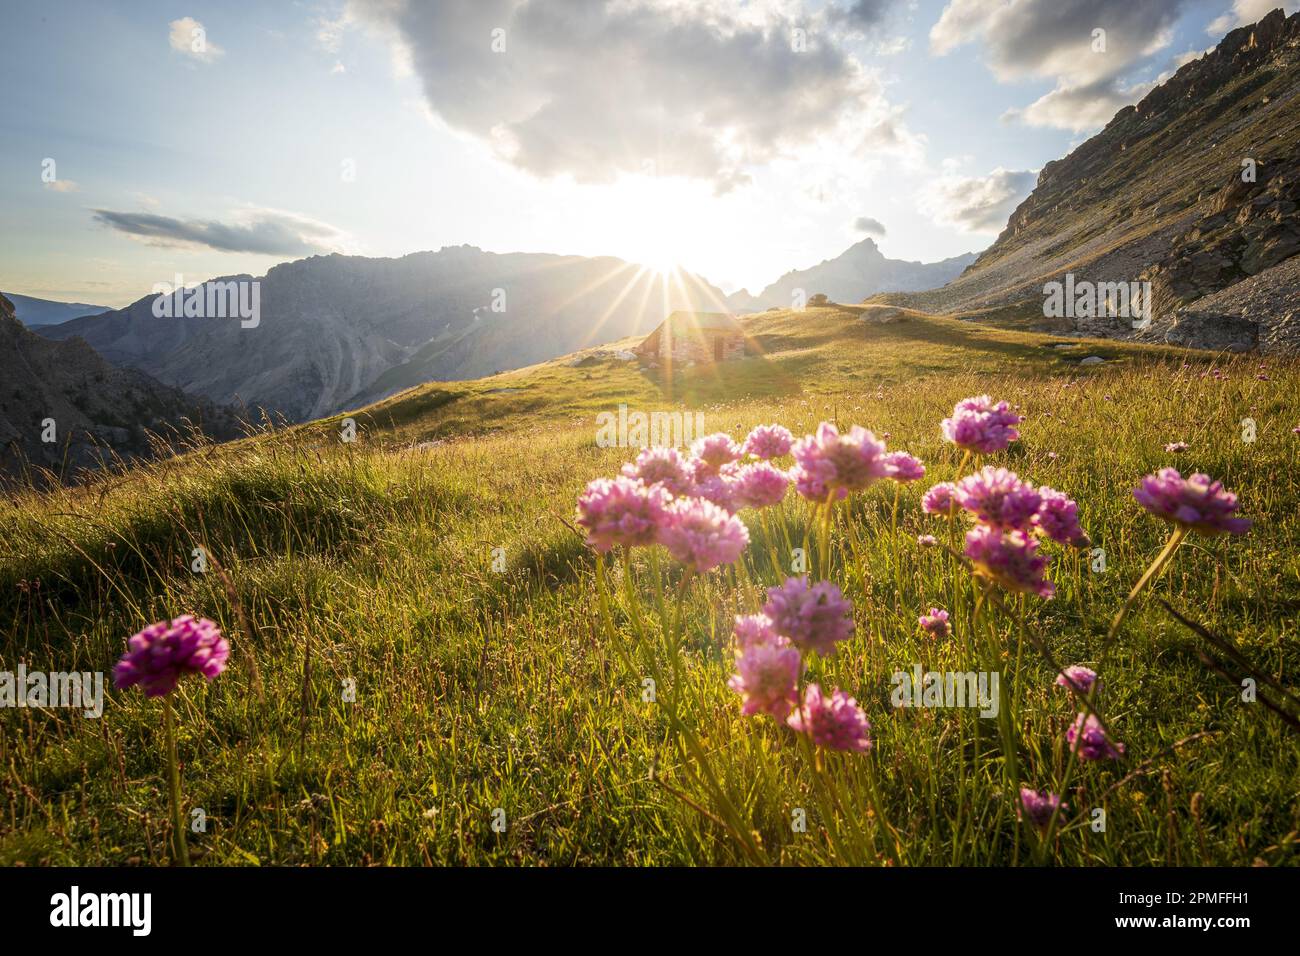 France, Alpes-de-Haute-Provence, Saint-Paul-sur-Ubaye, meadow with flowers of Alpine Thrift (Armeria alpina), the shepherd's hut of Chillol (2460 m) in the background Stock Photo